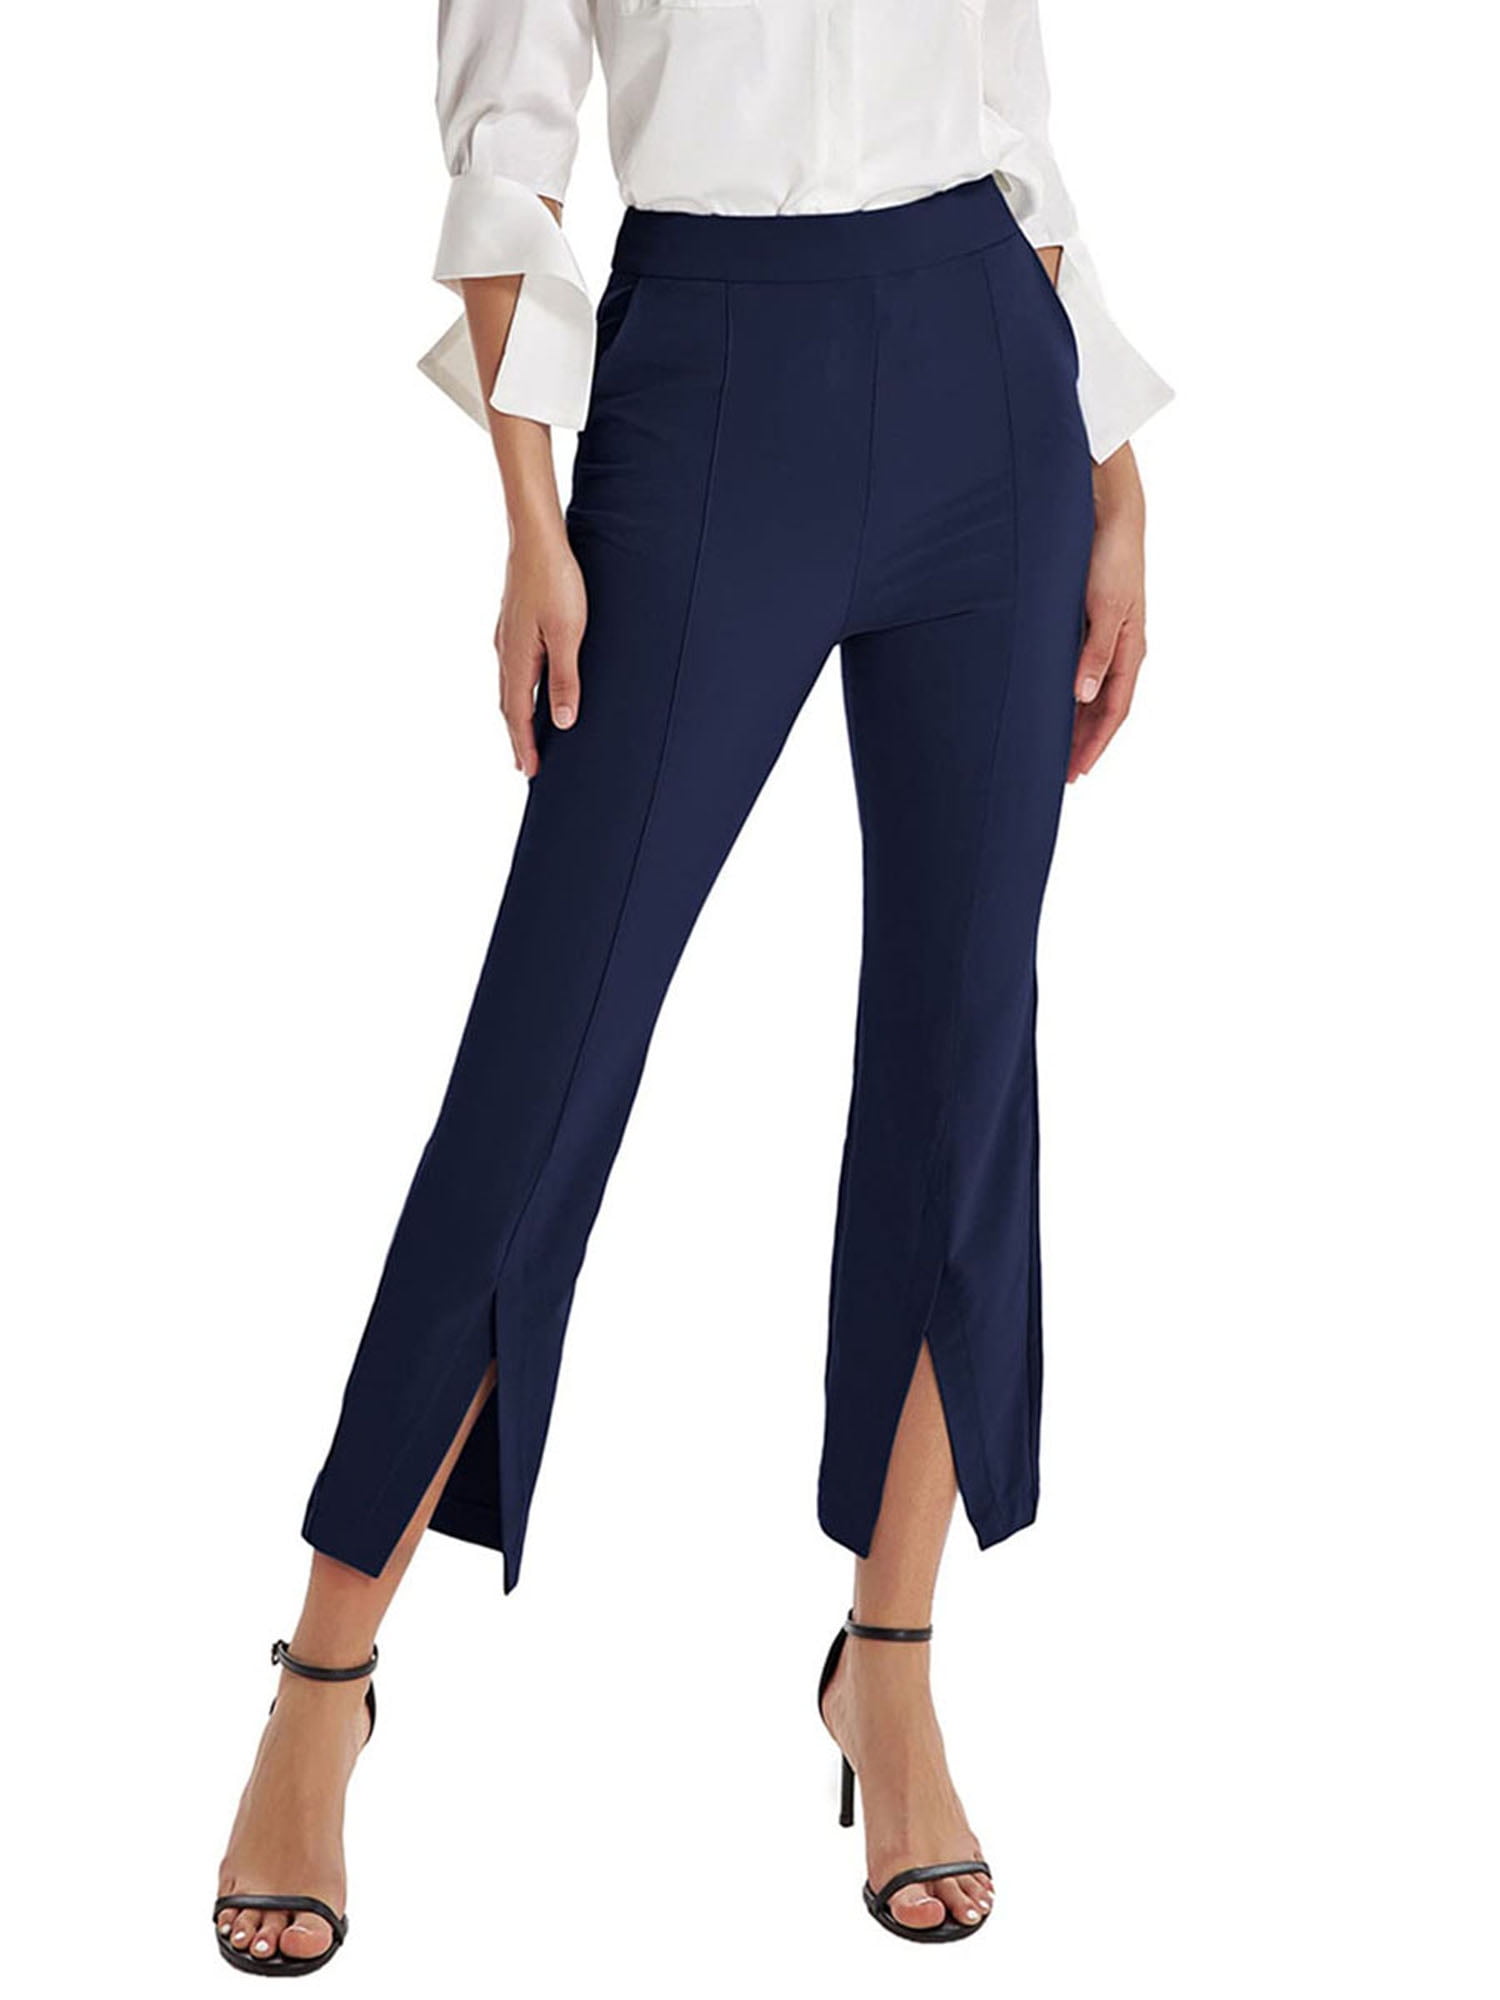 Karuedoo Women's High Waist Flared Work Pants Straight-Leg Front Slit  Cropped Trousers with Pockets Navy Blue M